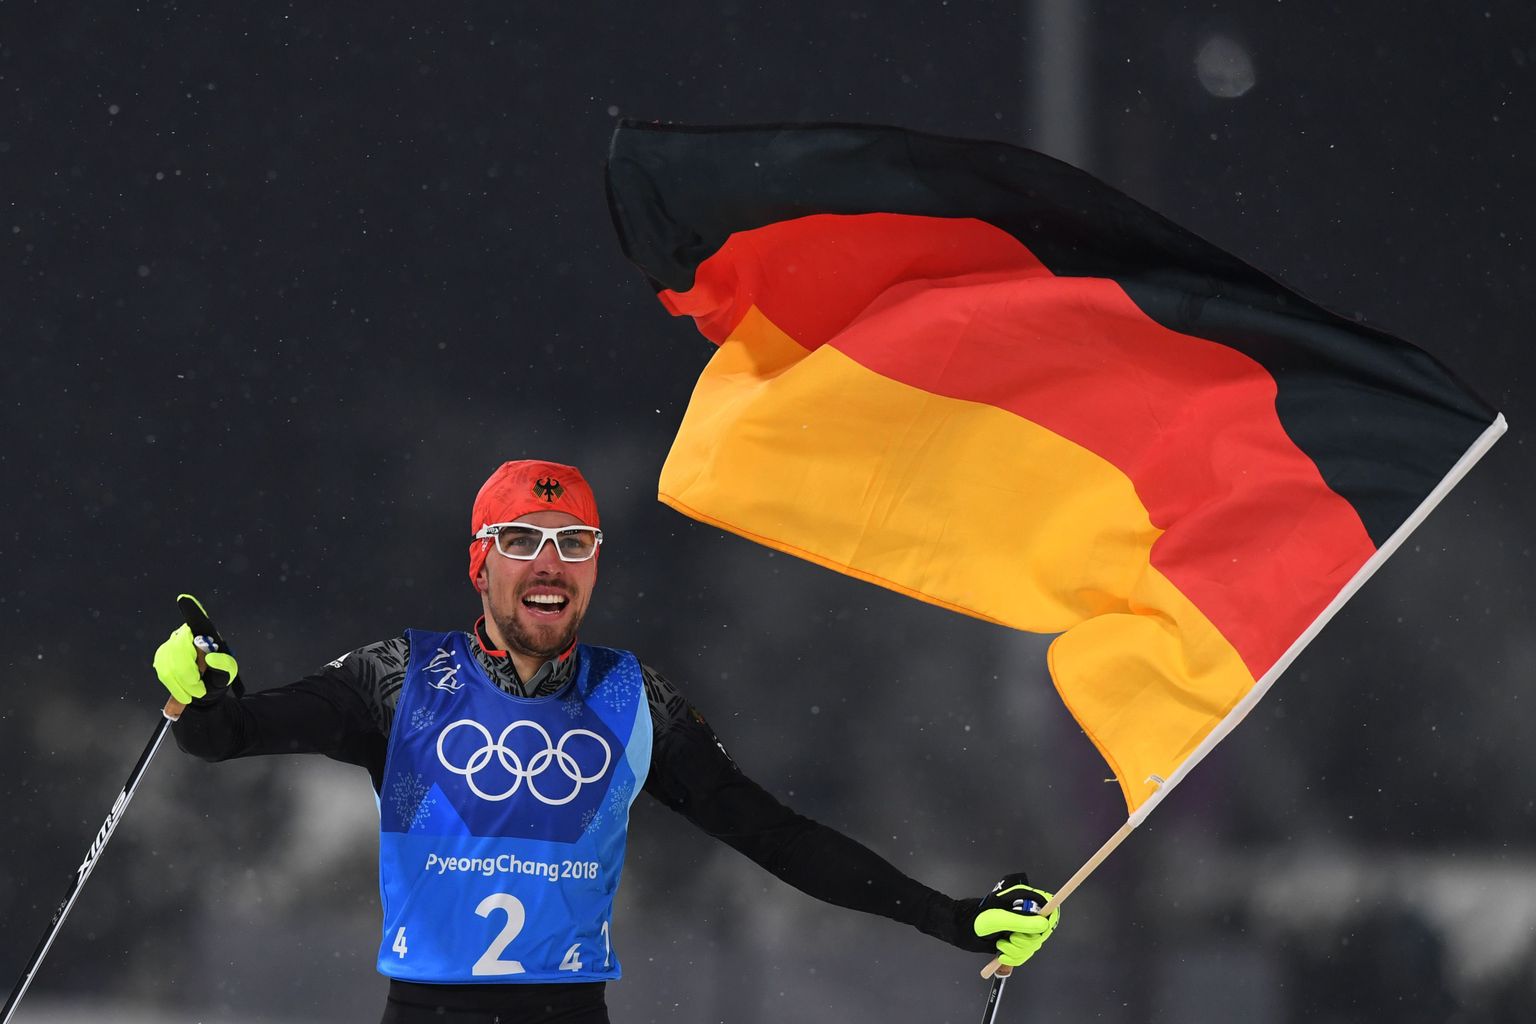 Germany's Johannes Rydzek holding a German flag crosses the finish line in the nordic combined team Gundersen LH/4x5km cross country at the Alpensia Cross-Country Skiing Centre during the Pyeongchang 2018 Winter Olympic Games on February 22, 2018 in Pyeongchang. / AFP PHOTO / Christof STACHE